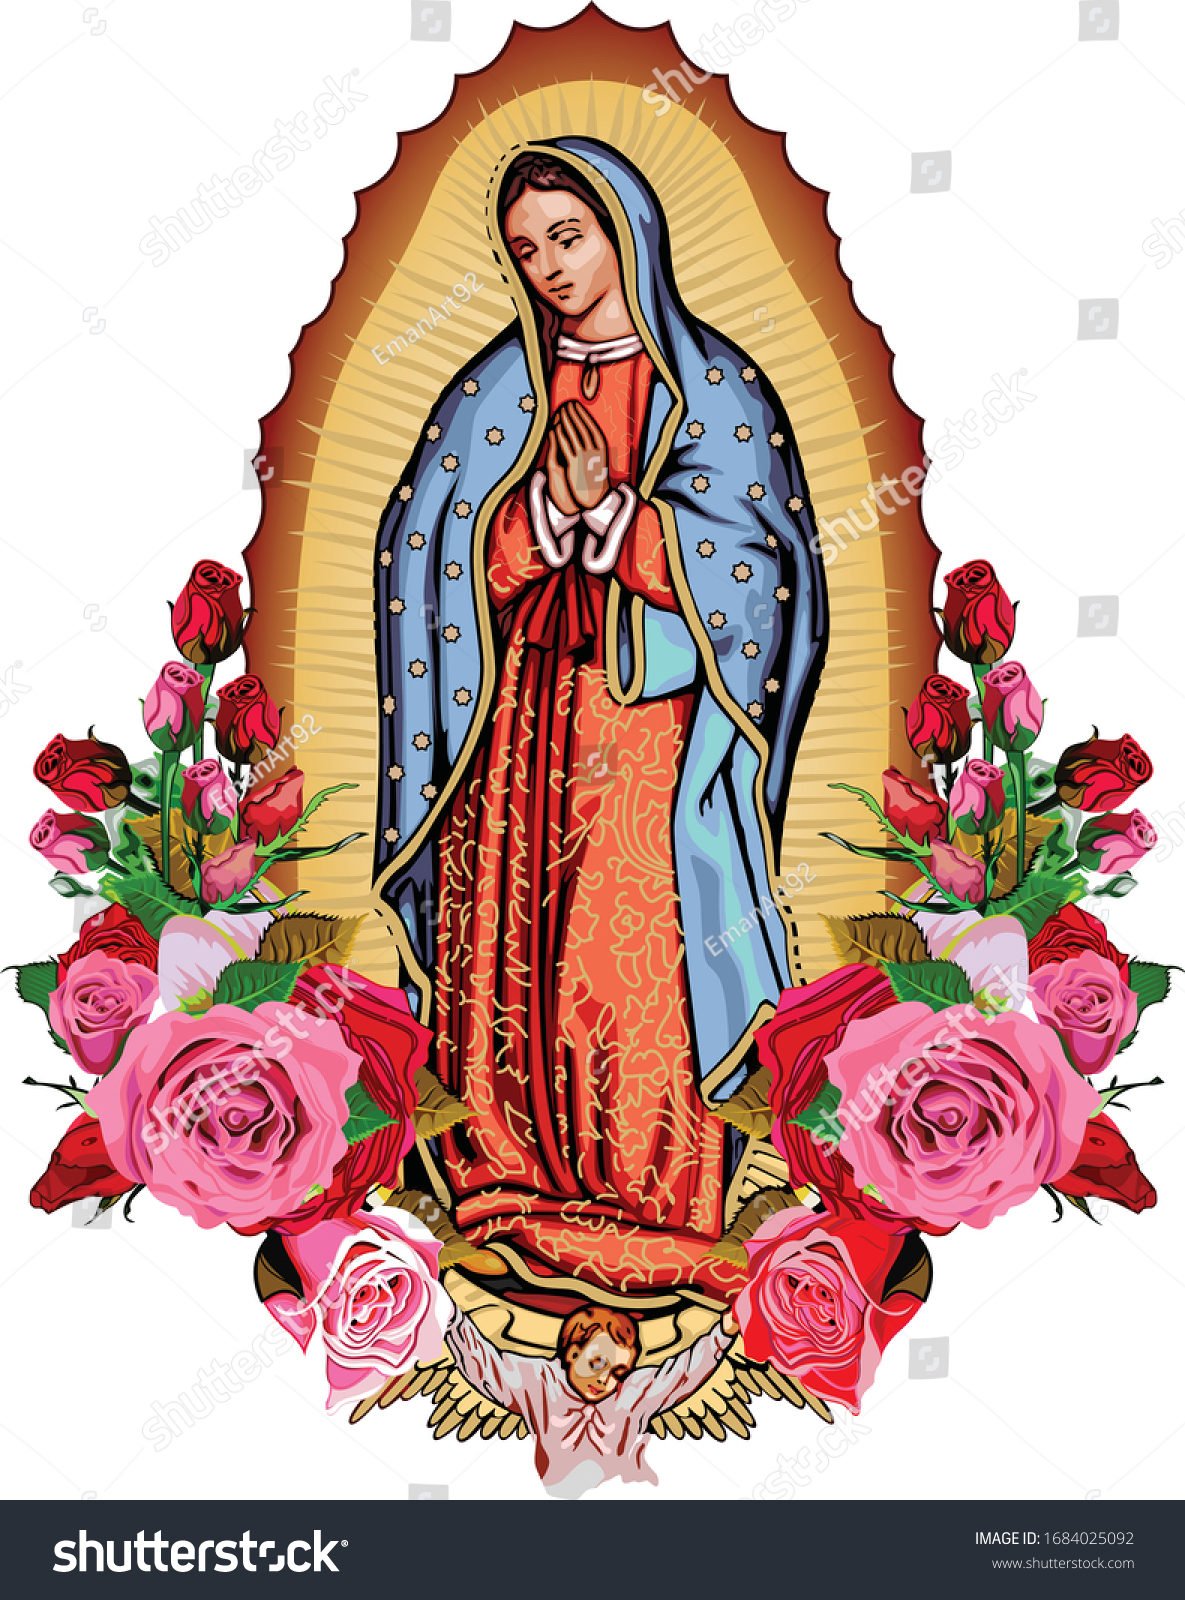 Feast Of Our Lady Of Guadalupe Deals Sale, Save 51% | jlcatj.gob.mx